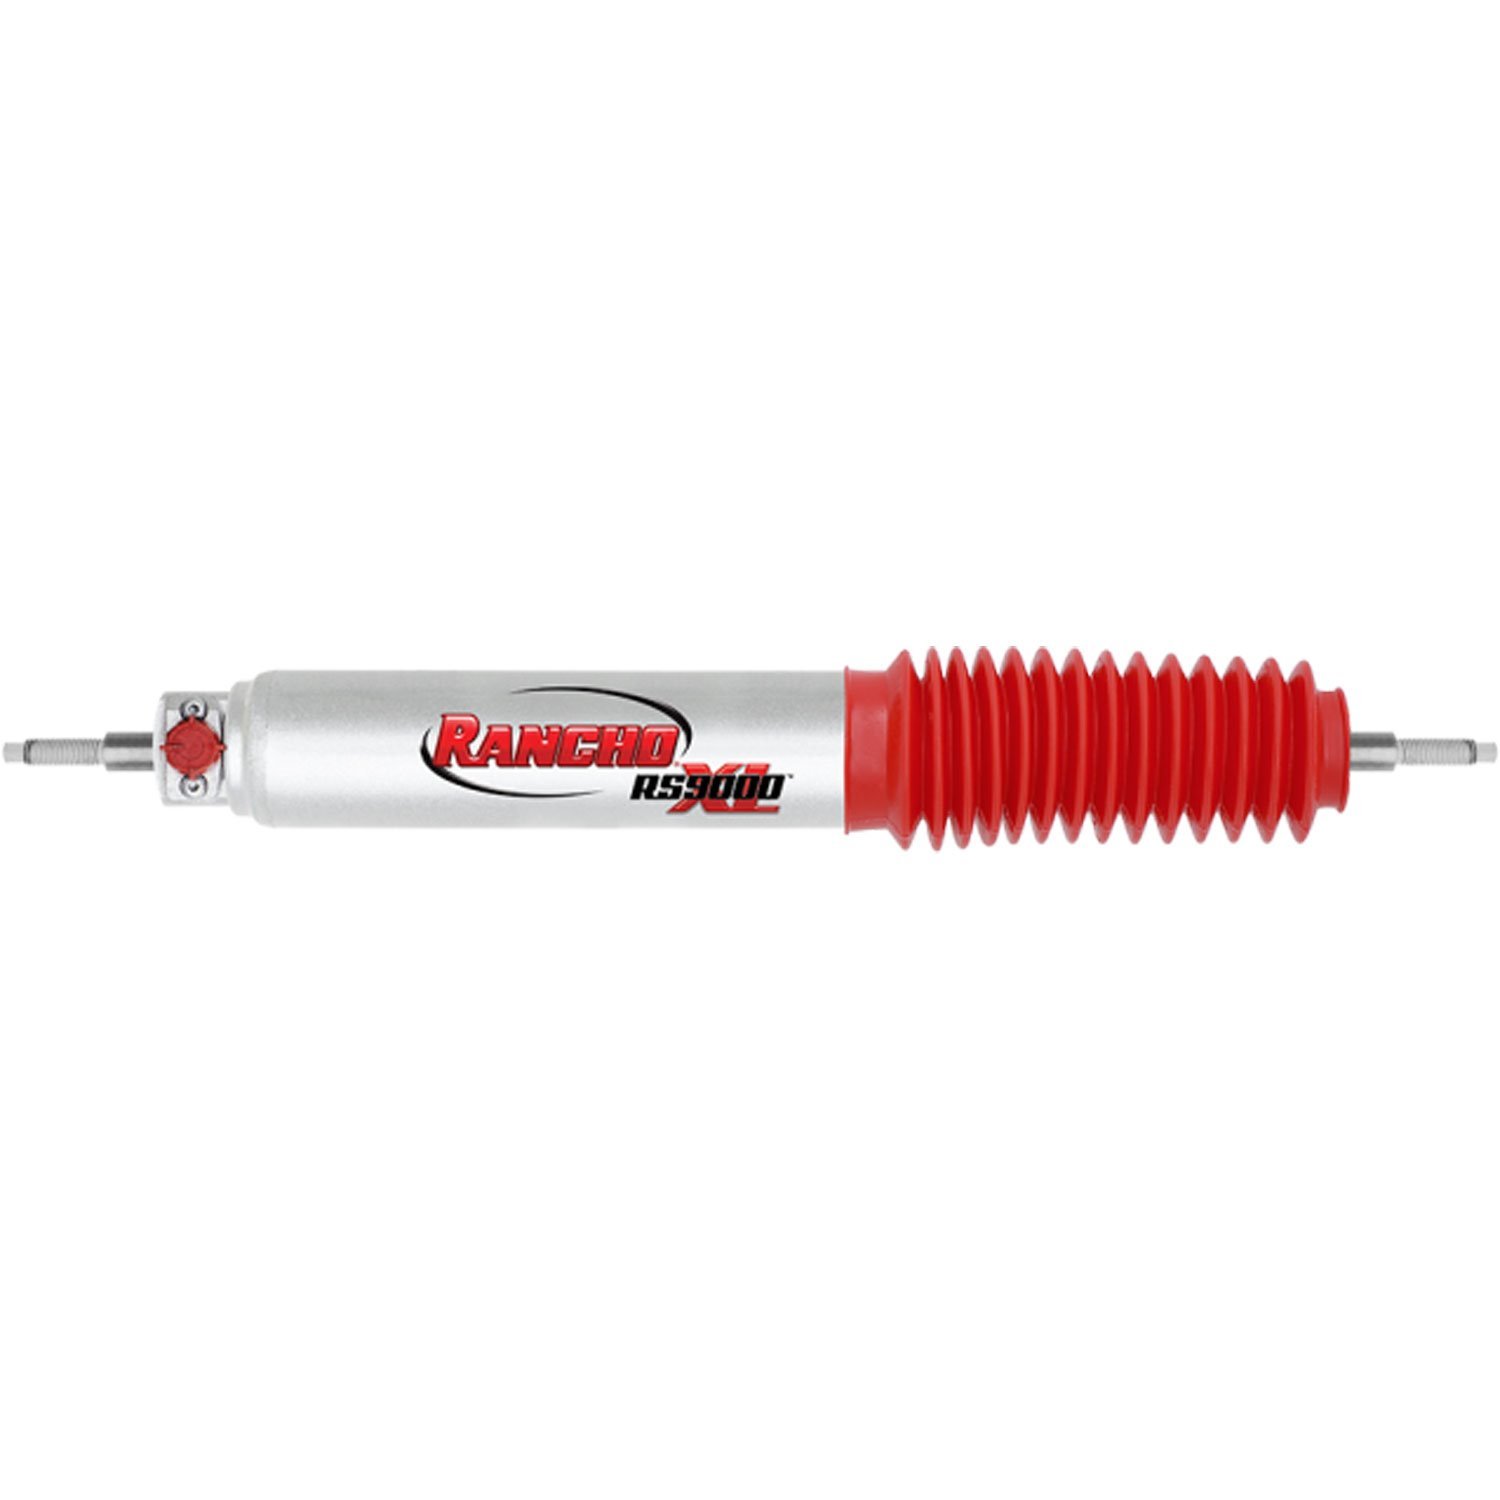 RS9000XL Front Shock Absorber Fits Land Rover Defender, Discovery and Range Rover